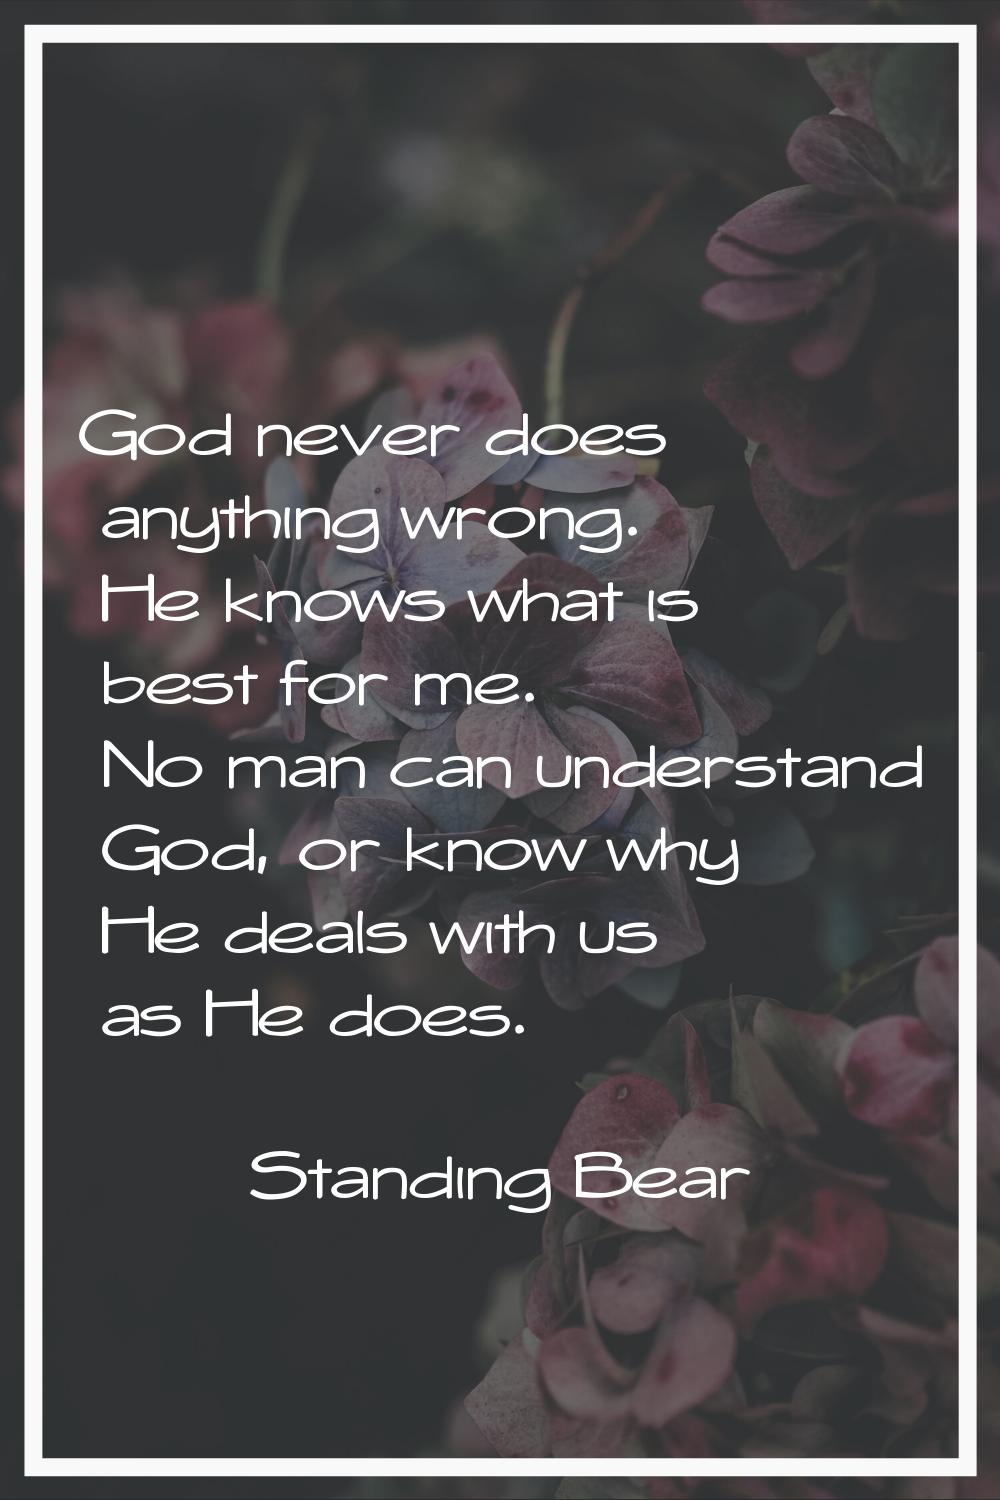 God never does anything wrong. He knows what is best for me. No man can understand God, or know why